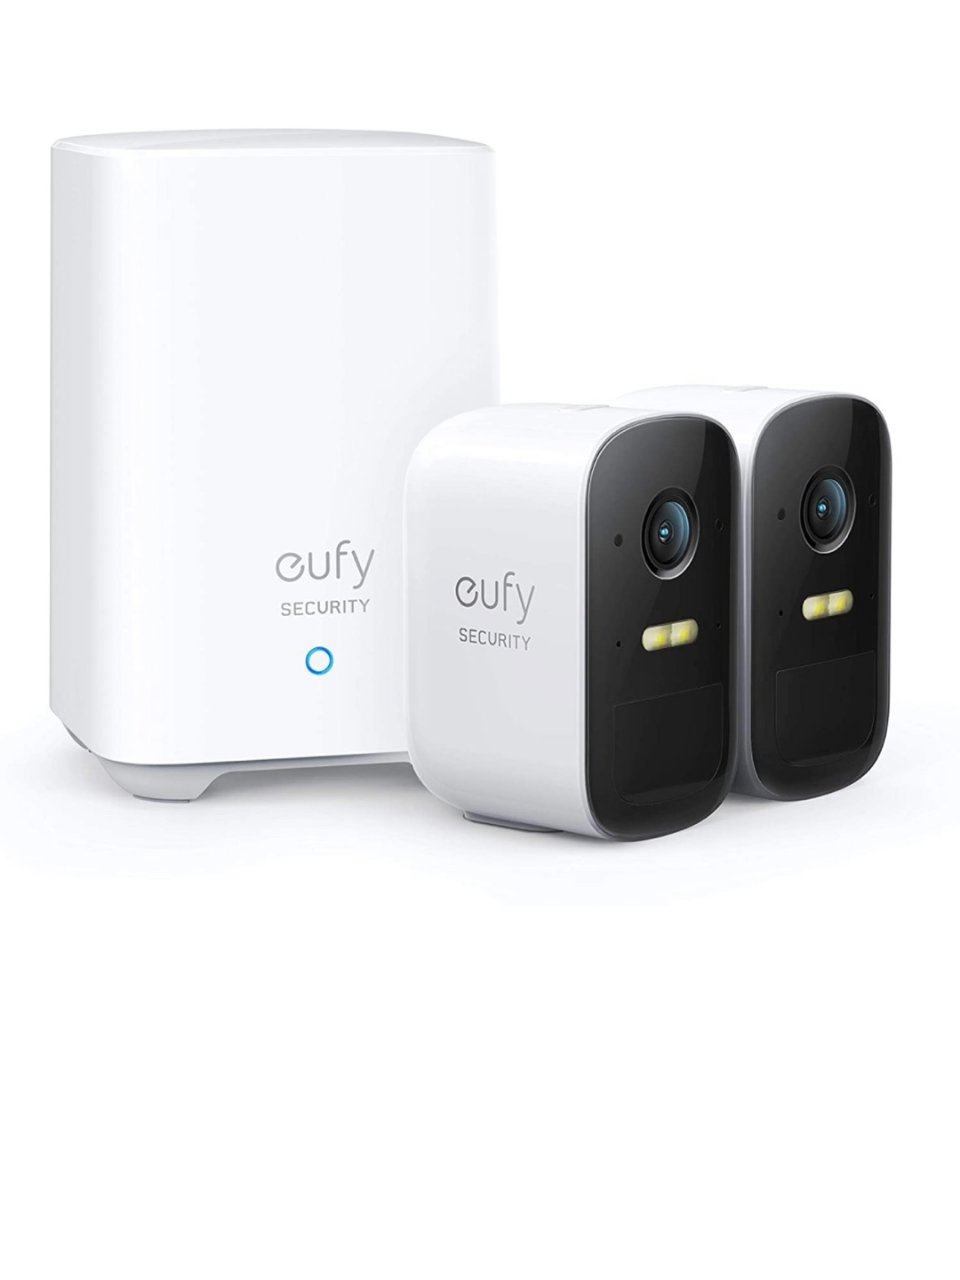 Eufy,eufy Security eufyCam 2C 2-Cam Kit Security Camera Outdoor, Wireless Home Security System with 180-Day Battery Life, HomeKit Compatibility, 1080p HD, IP67, Night Vision, No Monthly Fee : Amazon.co.uk: Electronics & Photo,eufy Security eufyCam 2C Pro 2-Cam Kit Security Camera Outdoor, Wireless Home Security Systems with 2K Resolution, 180-Day Battery Life, HomeKit Compatibility, IP67, Night Vision, and No Monthly Fee. : Amazon.co.uk: DIY & Tools